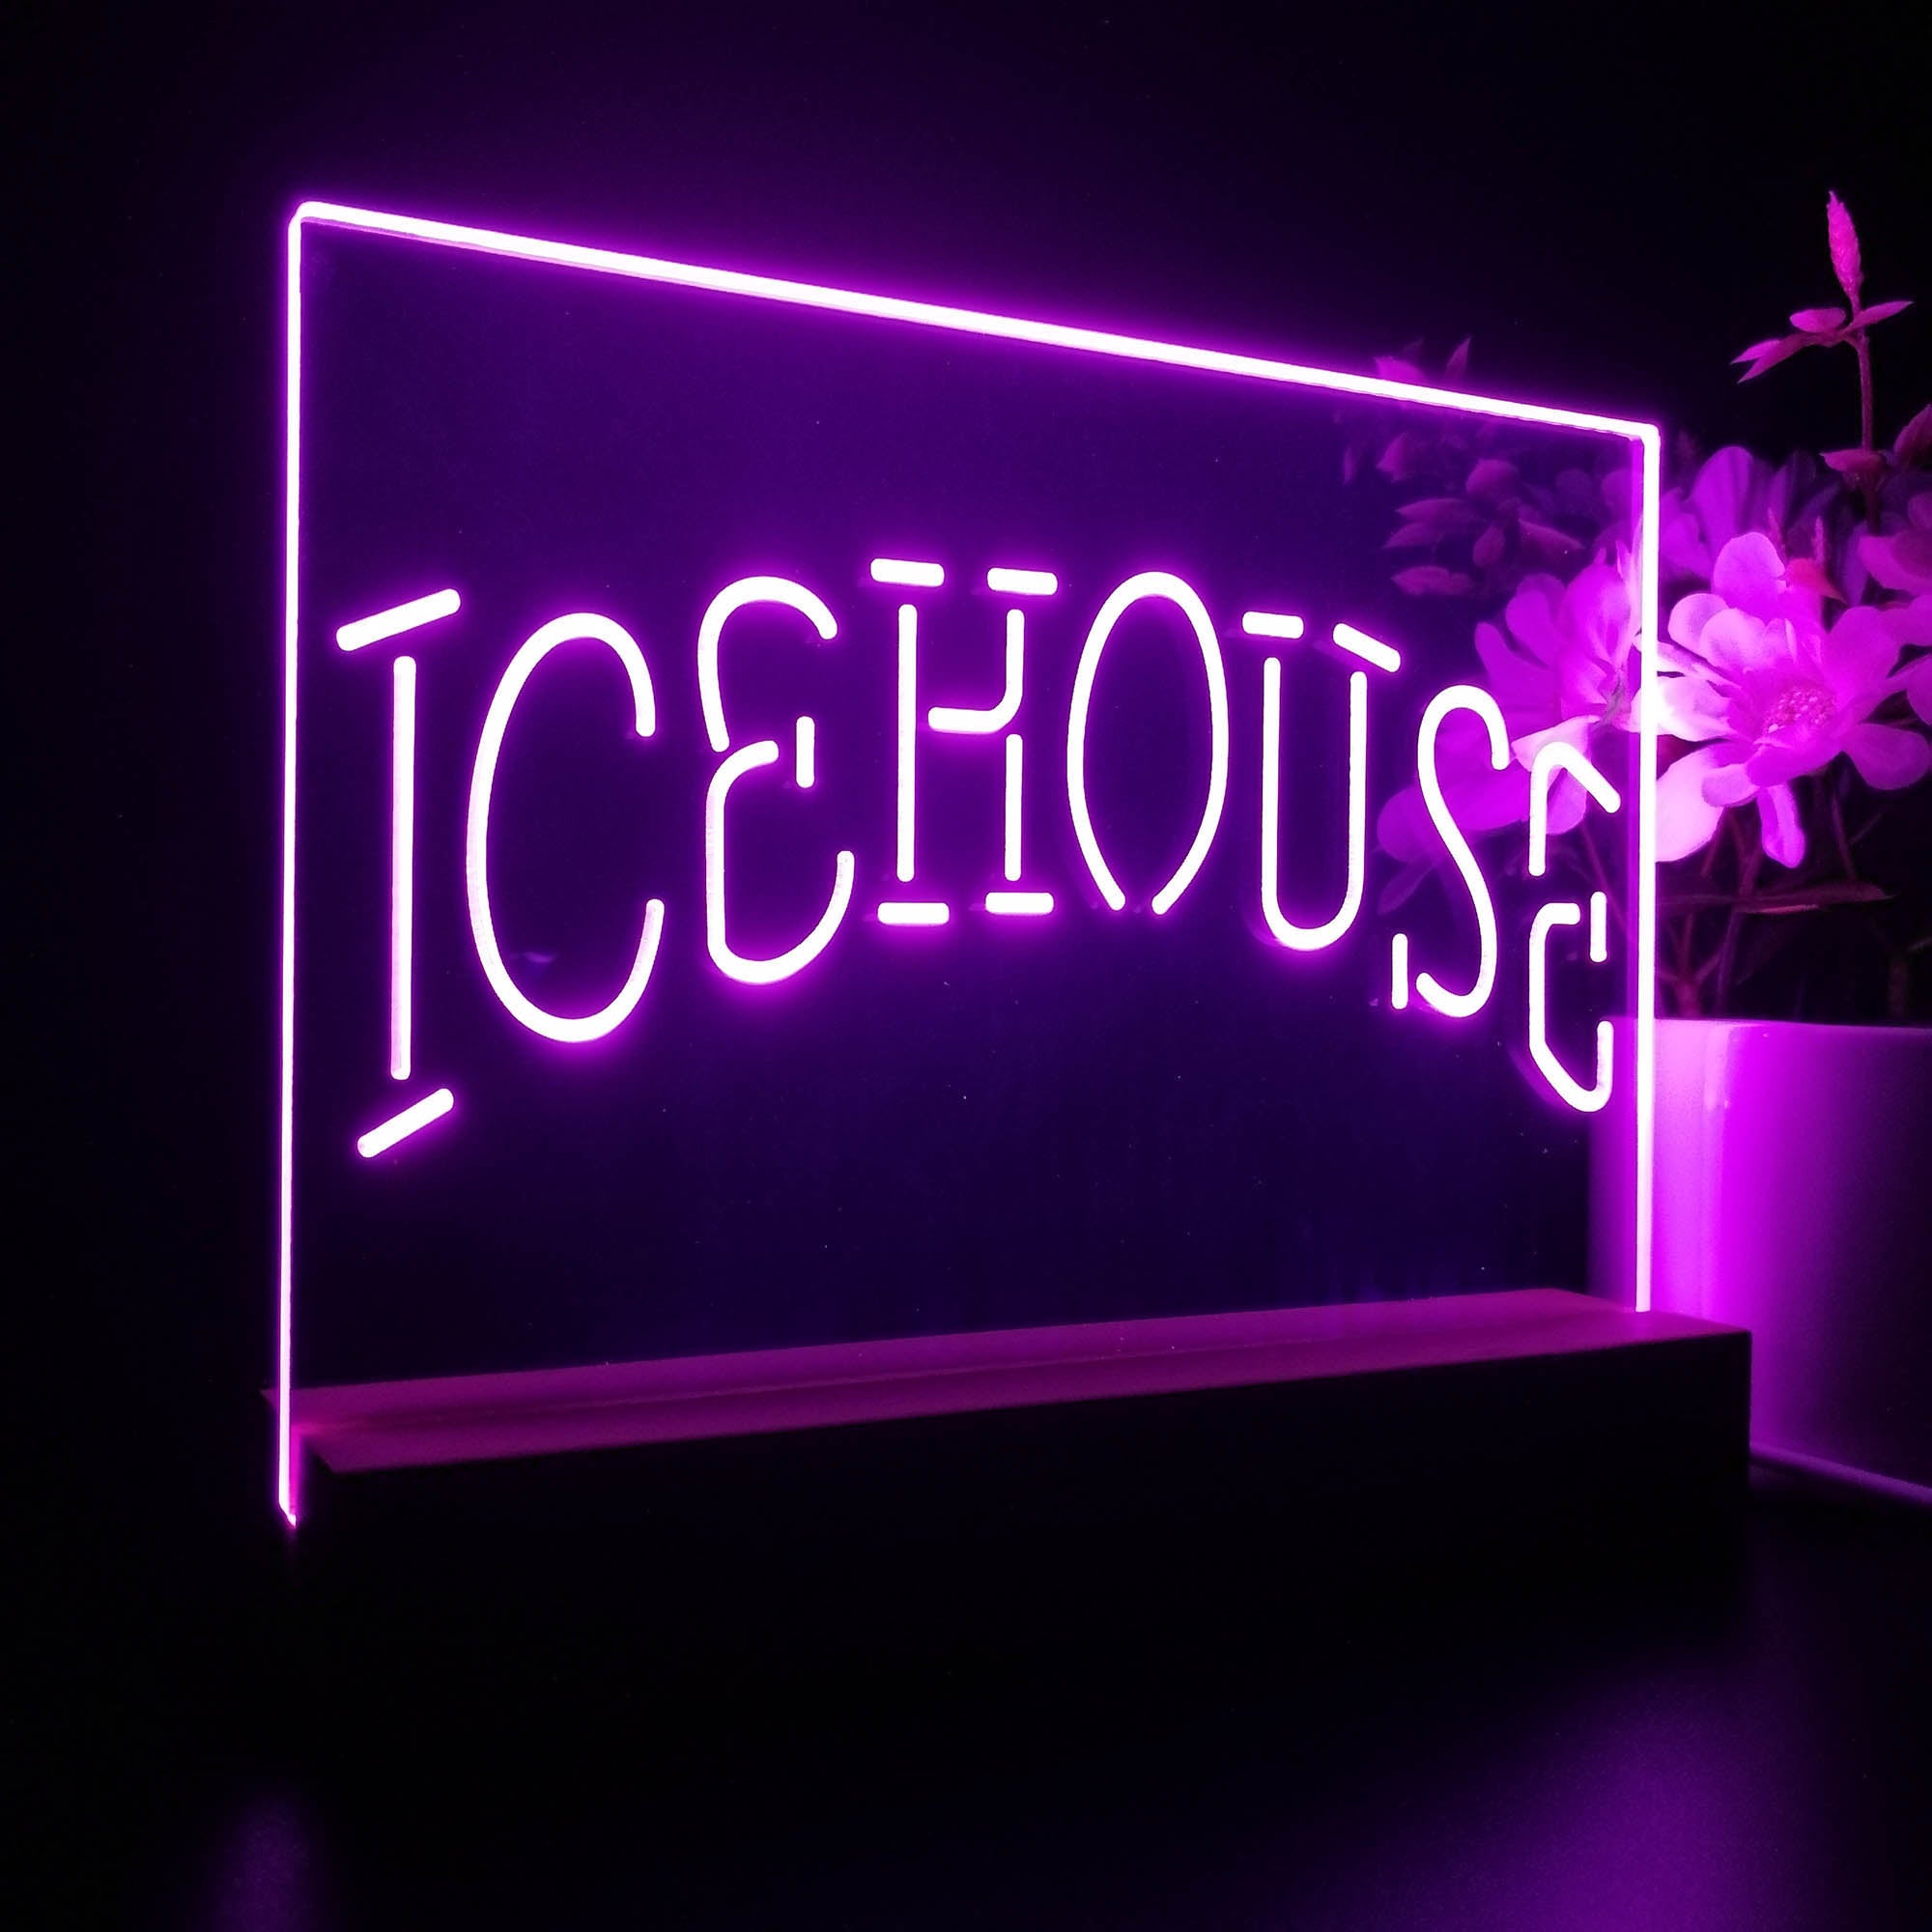 Icehouse Beer Night Light LED Sign